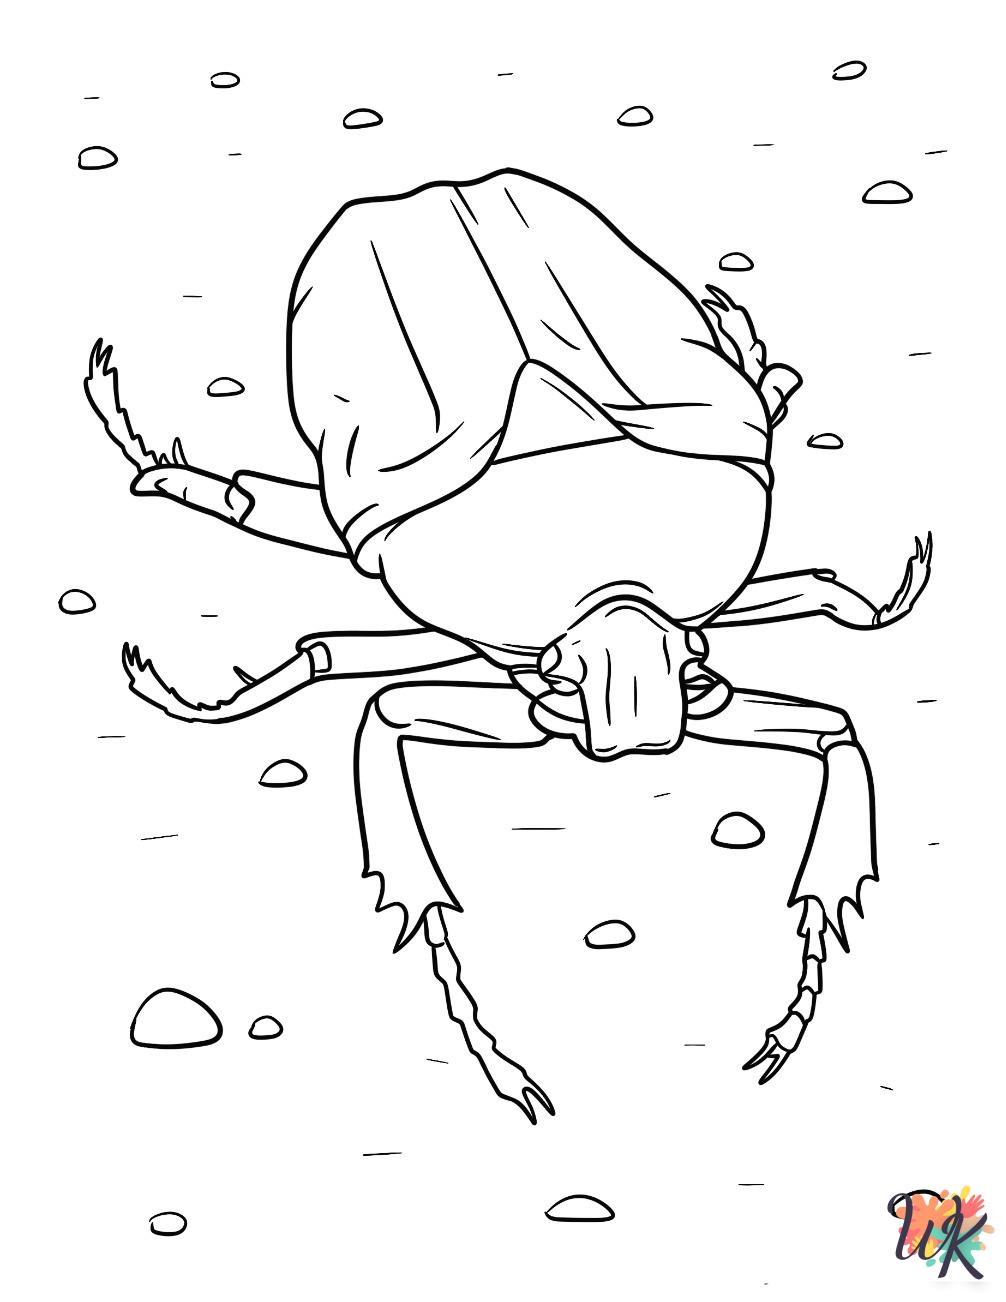 free full size printable Beetle coloring pages for adults pdf